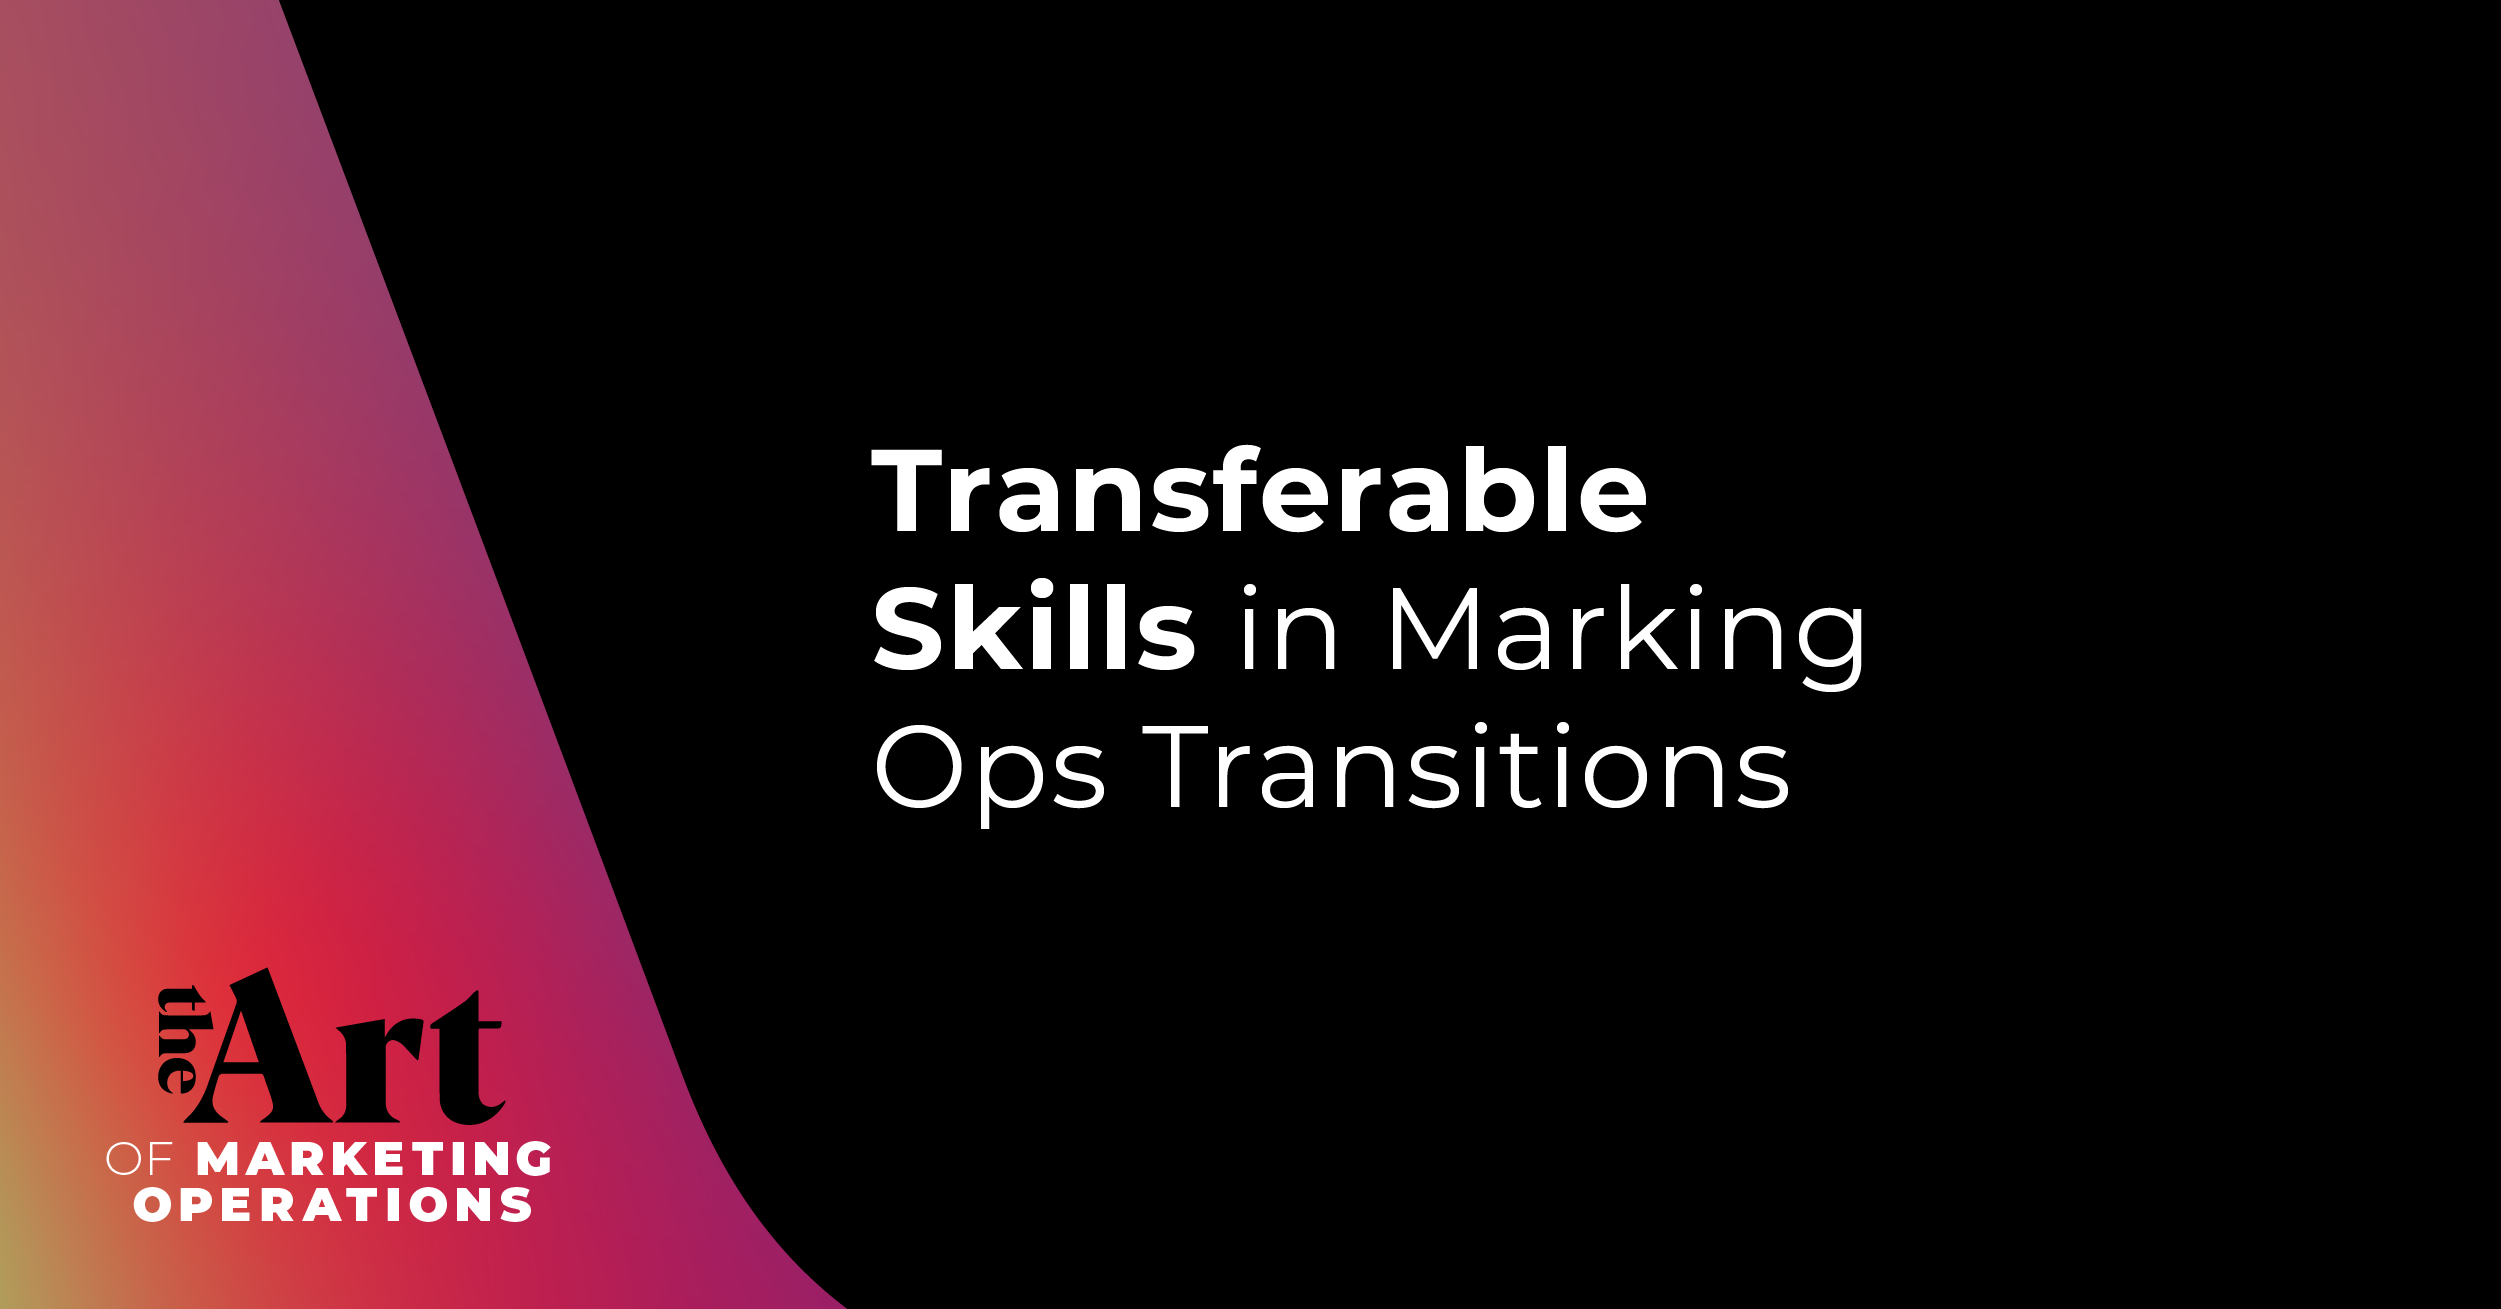 Transferable Skills in Marketing Ops Transitions